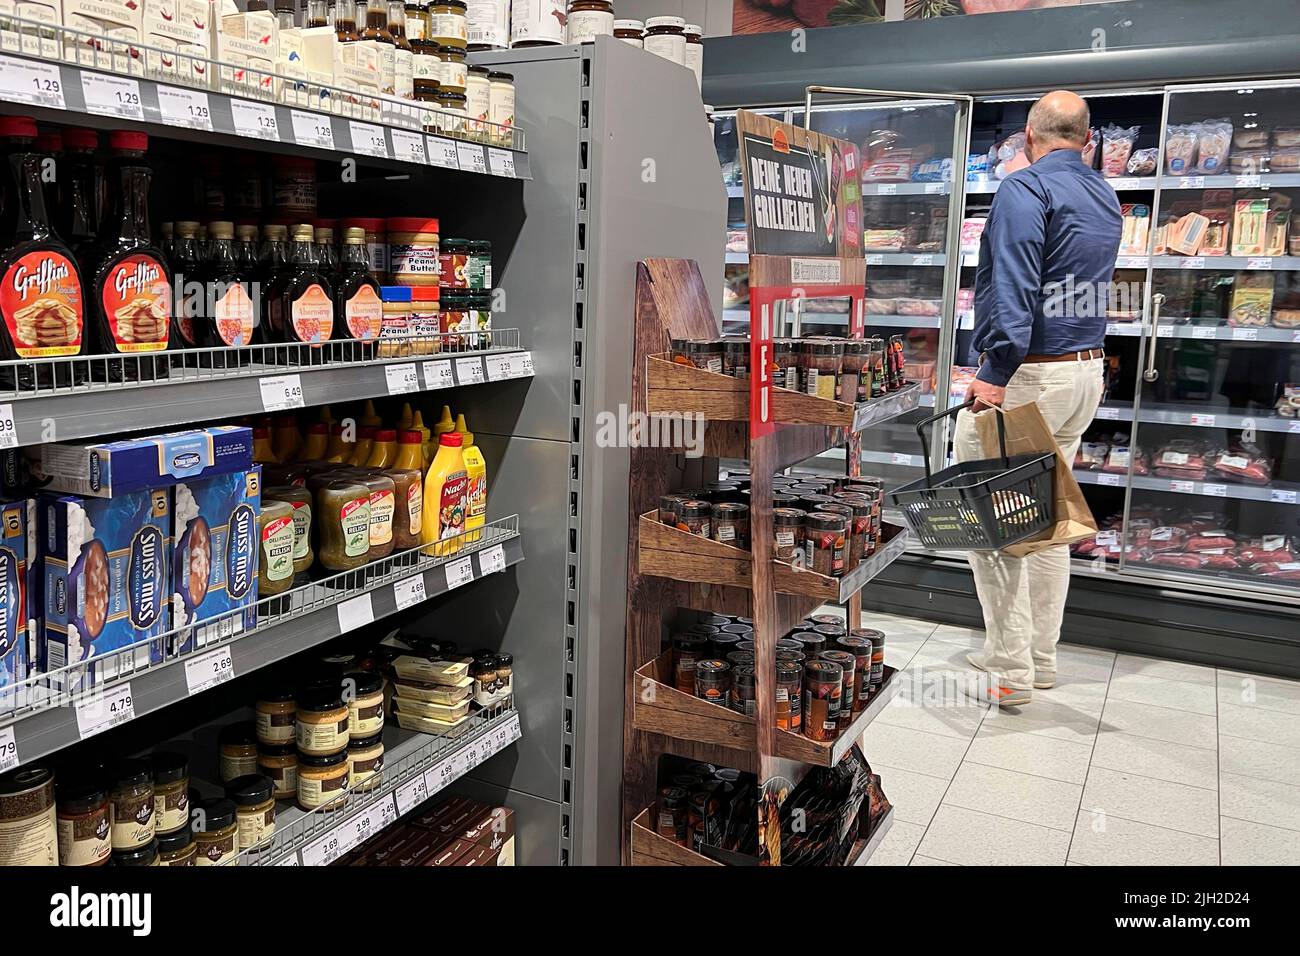 Munich, Germany. 14th July, 2022. Munich, Deutschland. 14th July, 2022. CONSUMER PRICES: Inflation in Germany A man stands in front of a refrigerated shelf and looks spellbound at the prices, price tag, price display, refrigerated counter, meat and sausage products. Purchasing, inflation, consumer prices, Credit: dpa/Alamy Live News Credit: dpa picture alliance/Alamy Live News Stock Photo